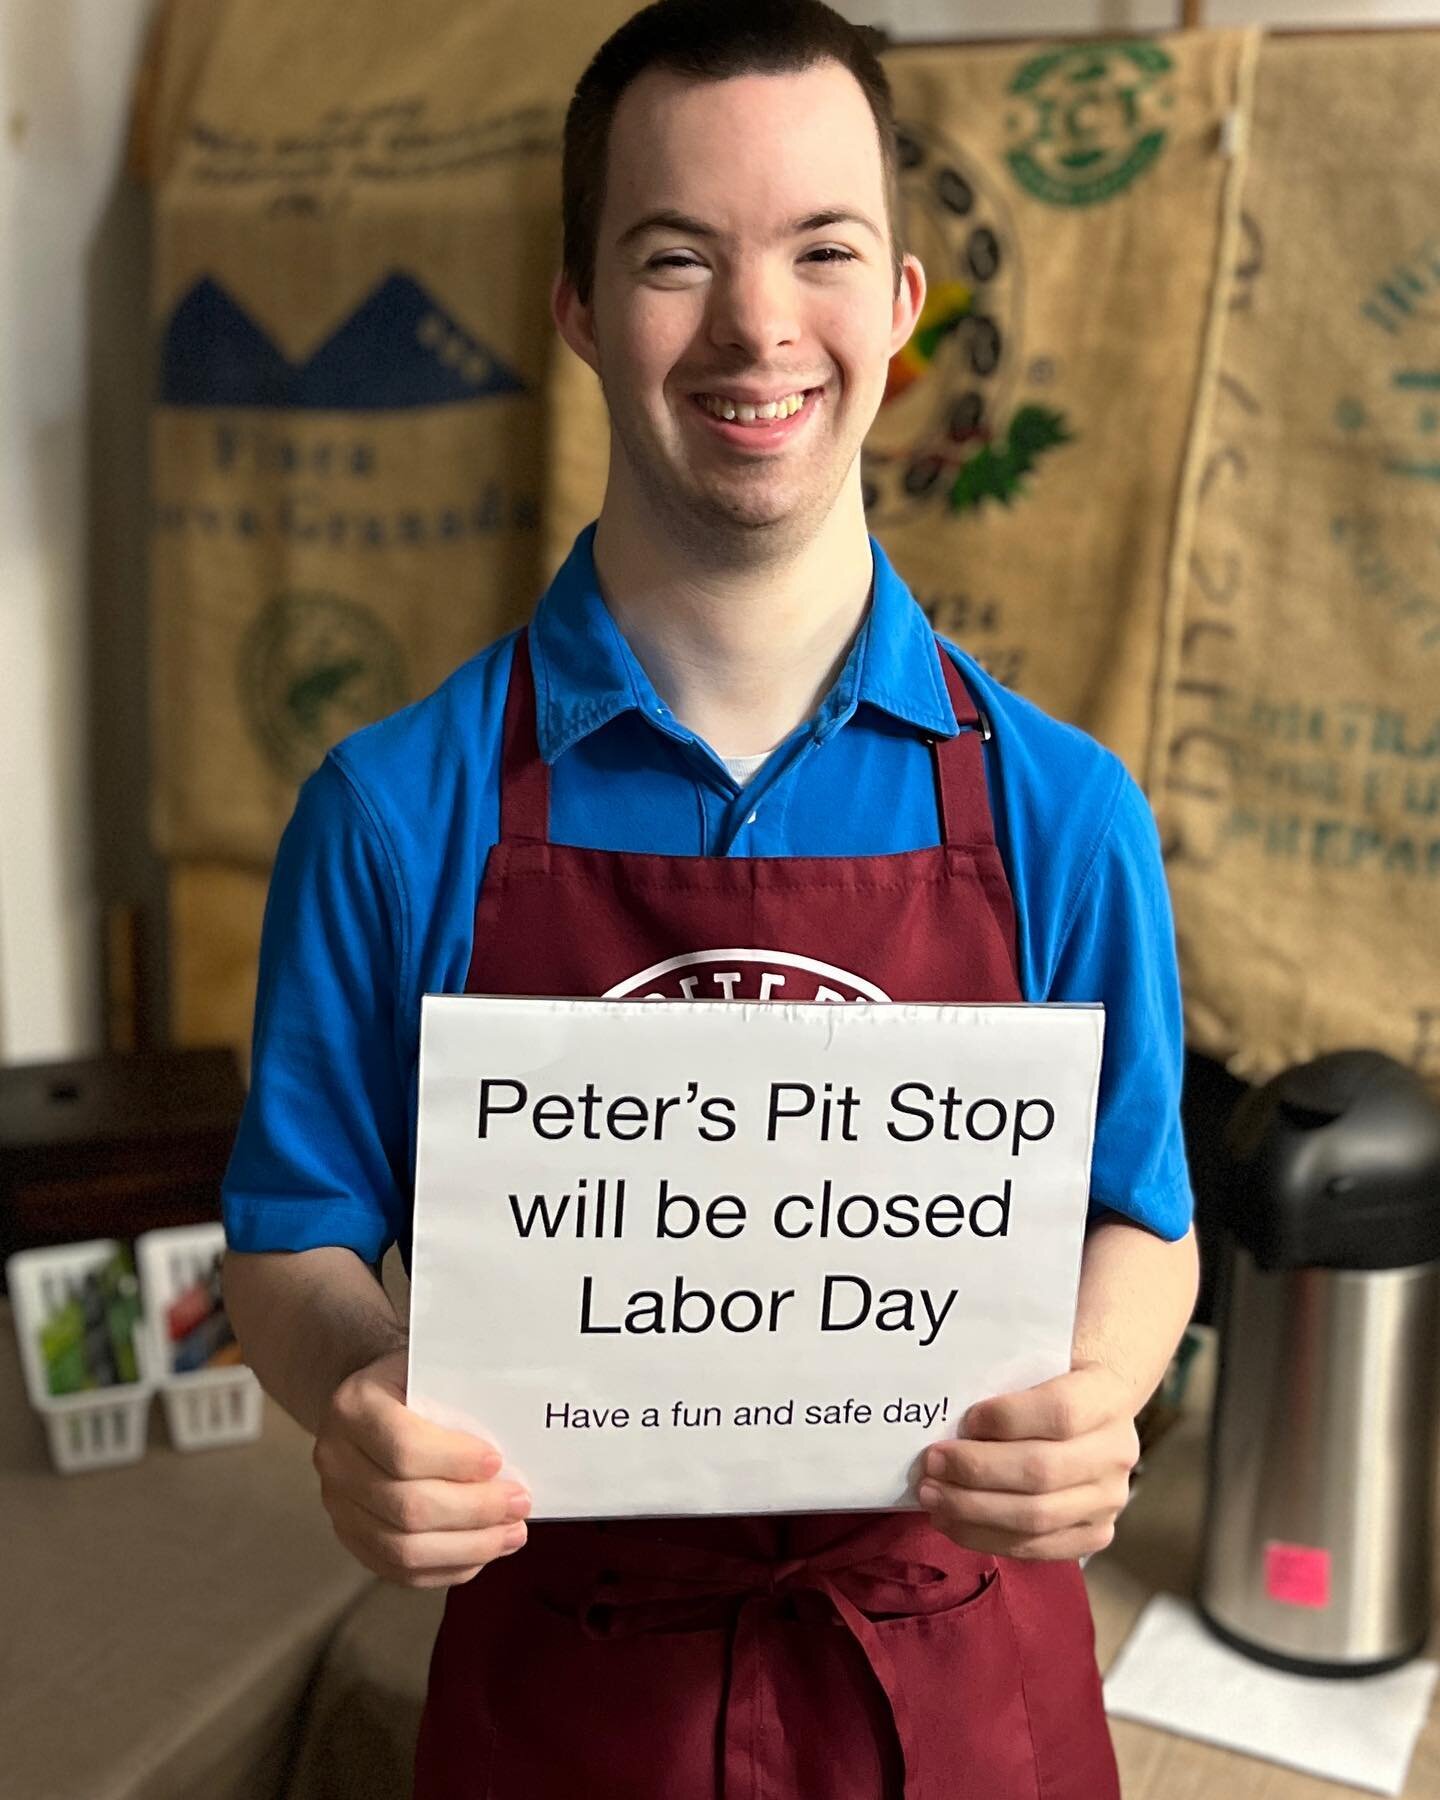 Happy Labor Day weekend! Just to let everyone know that we are closed Monday for Labor Day. We will be back open Tuesday. Today as usual, we are open and eager to serve you. See you soon! #PetersPitStop
#Meridianatlakesofcanebay
#Canebayplantation
#i